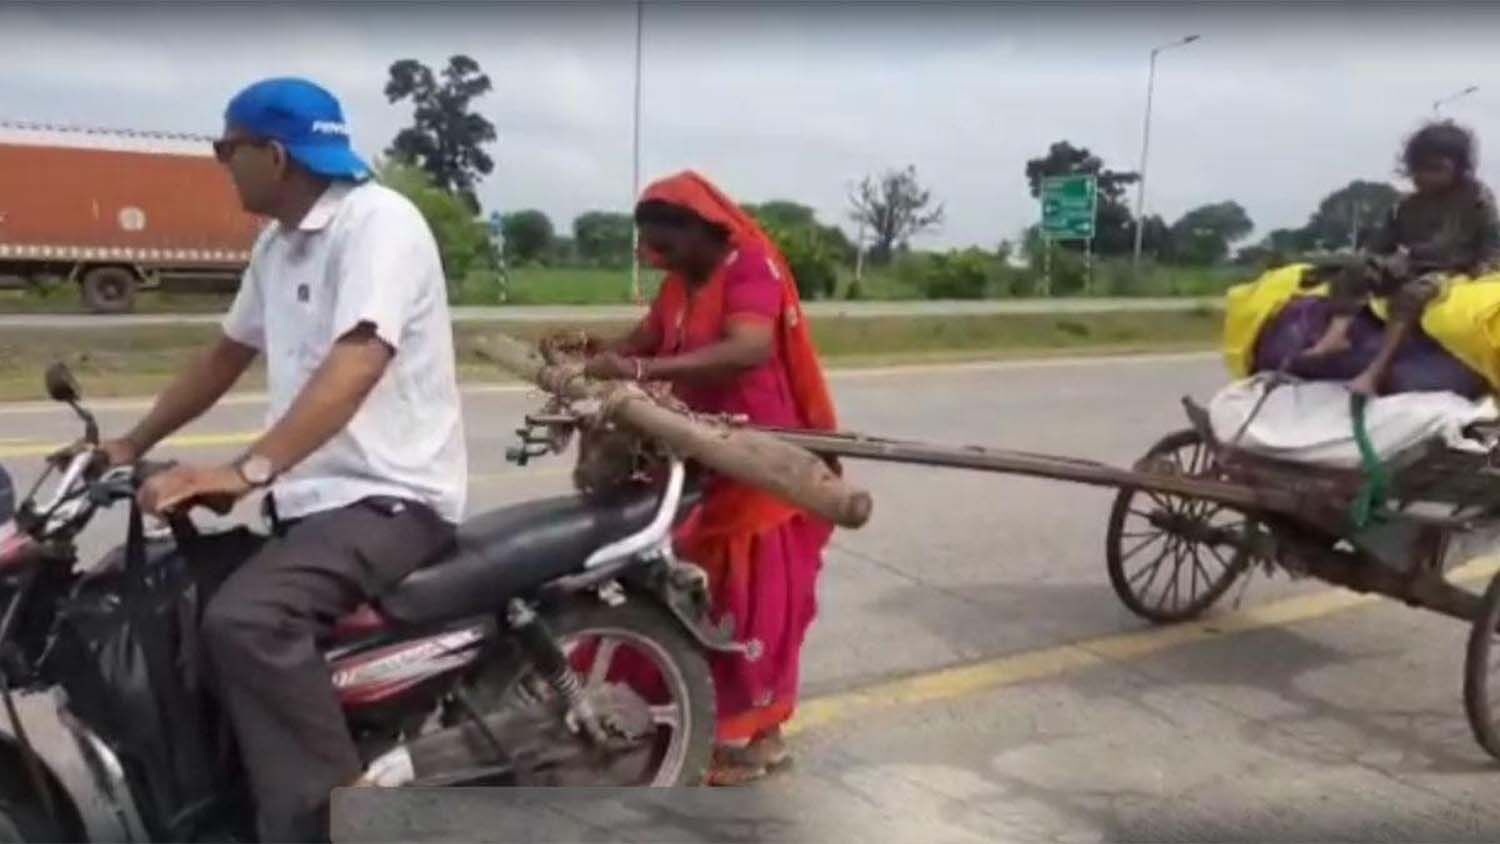 MP News Today: Hungry widow woman pulling bullock cart and girl sitting, teacher ran on seeing